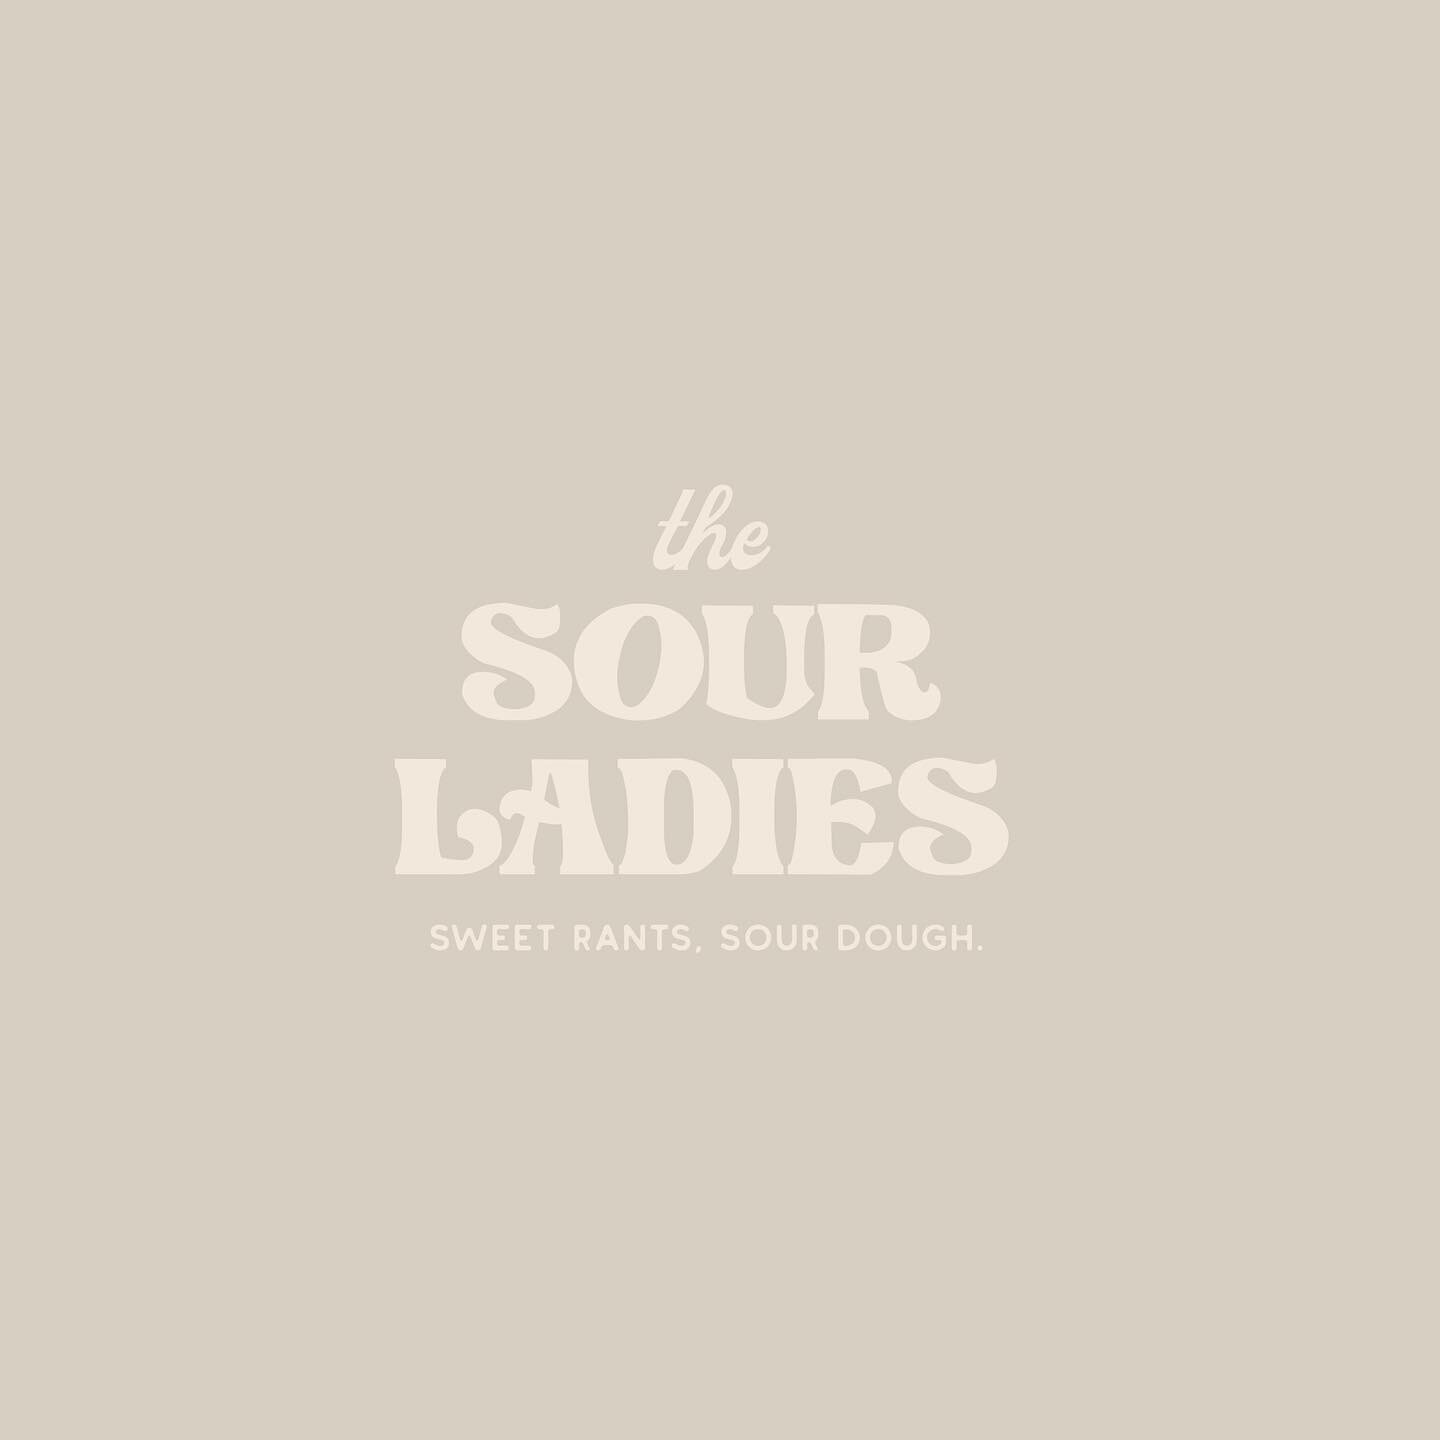 Branding for a fun little passion project on the horizon! Meet @thesourladies! Two of my coworkers (turned besties) and I are obsessed with baking sourdough and totally joked around to turn it into a business. Well, lots of text messages later, here 